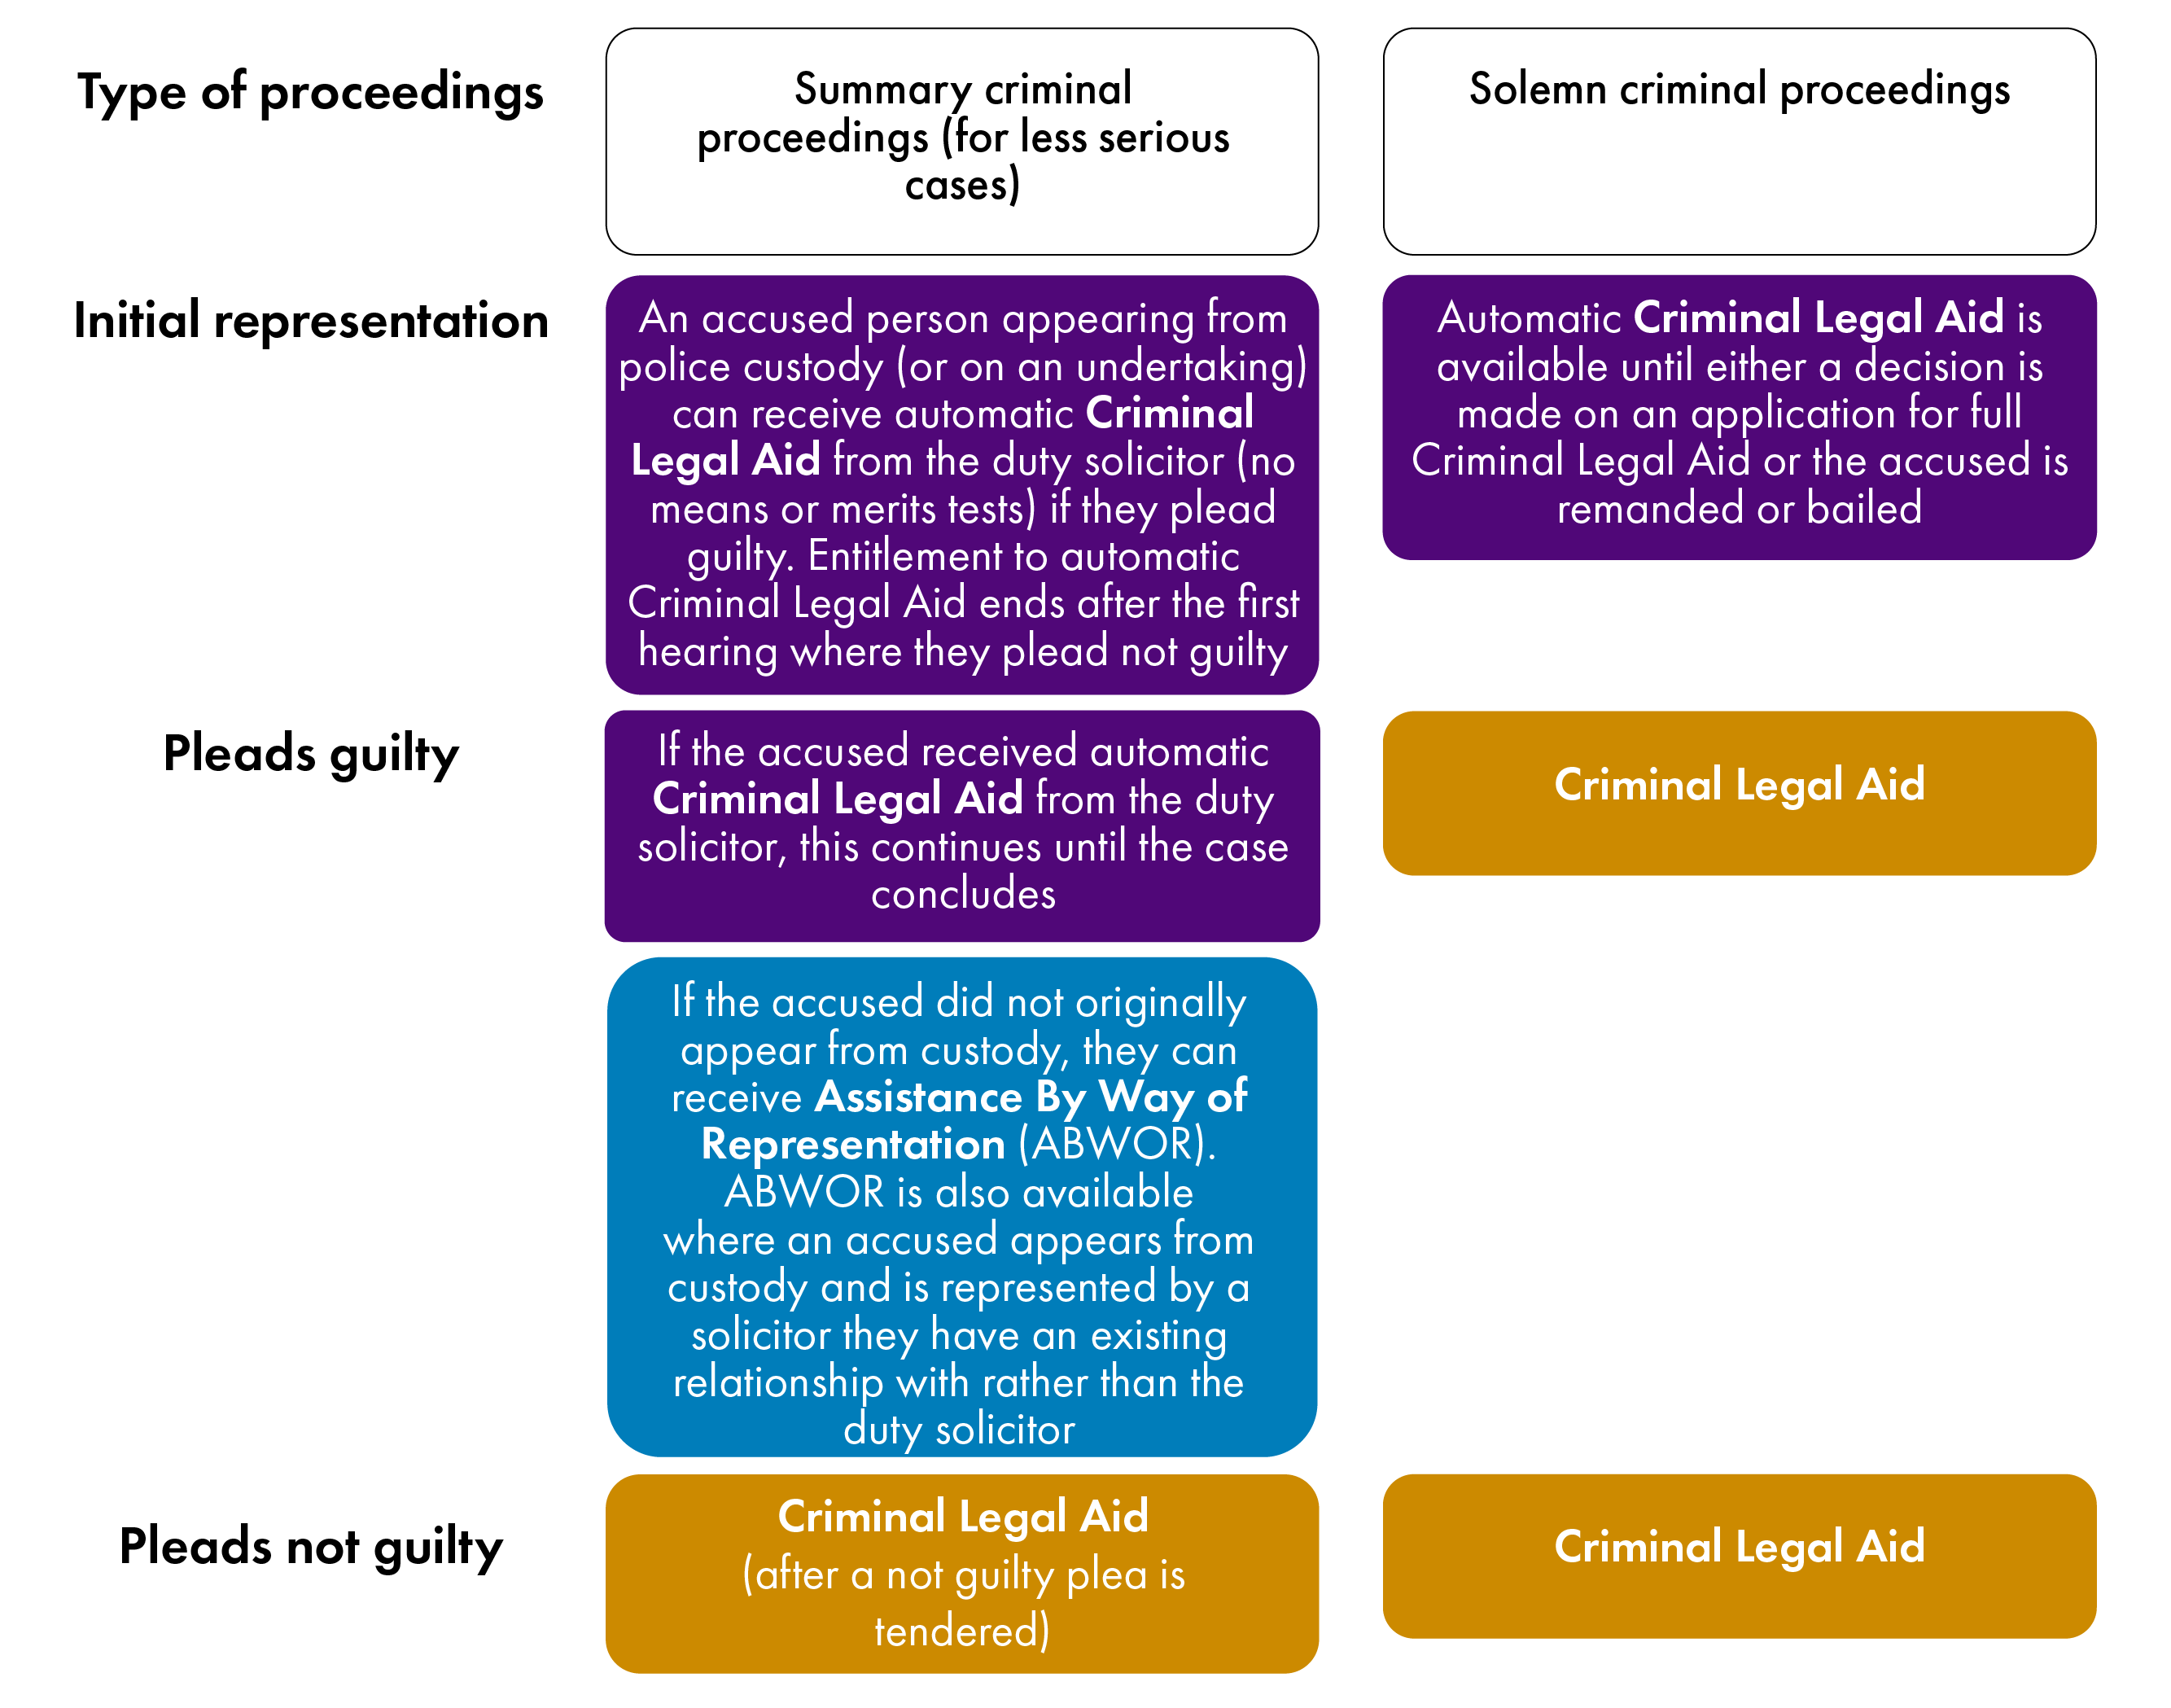 An image showing the availability of criminal legal assistance at different stages of court proceedings.